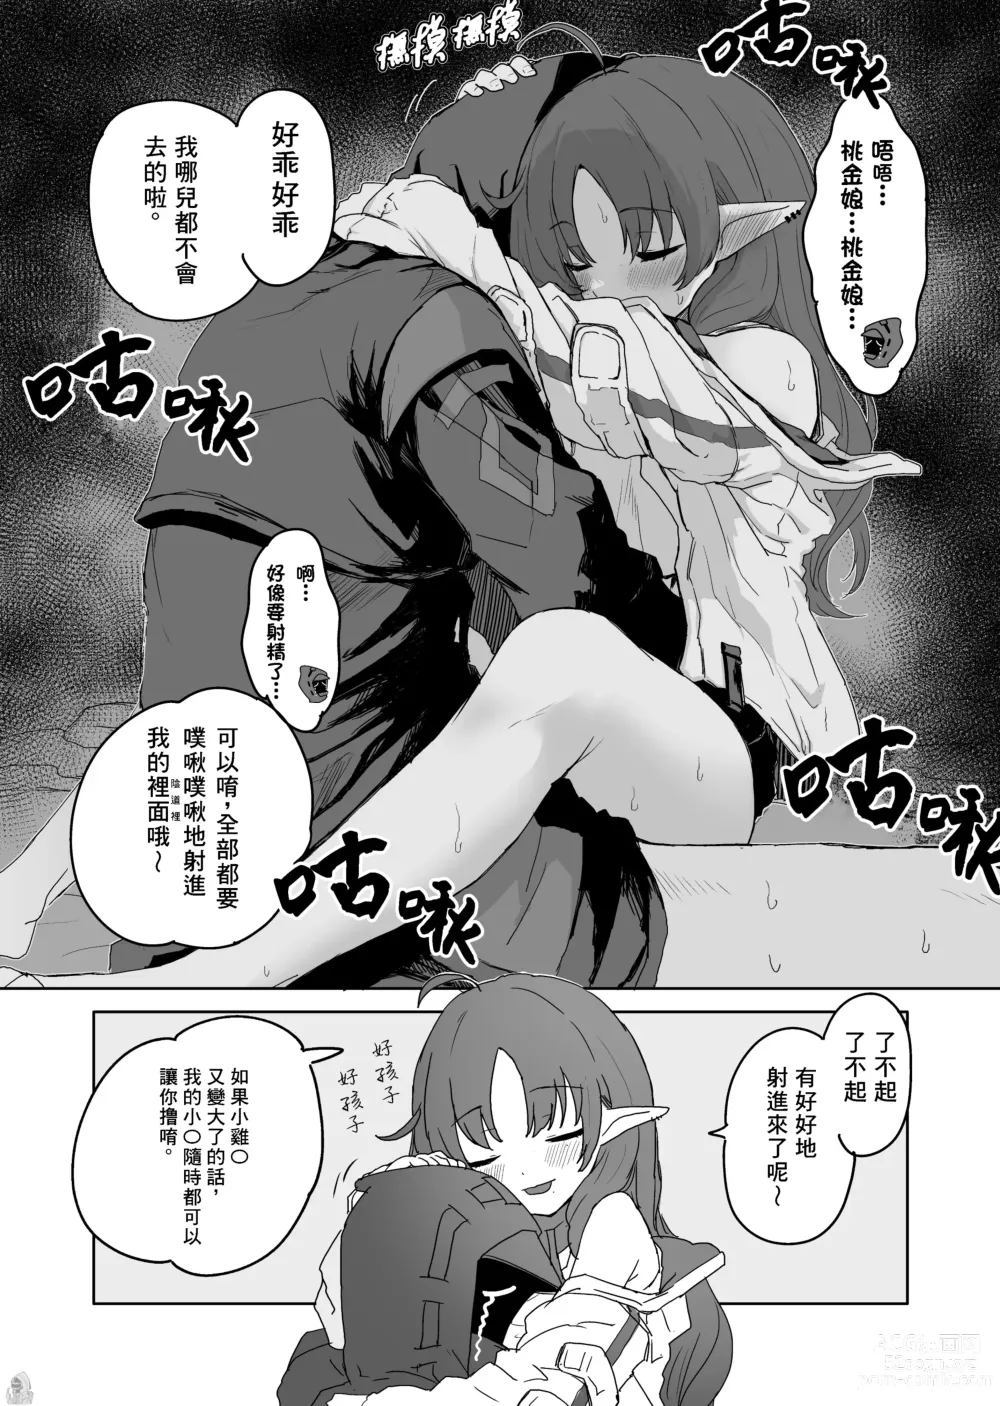 Page 41 of doujinshi Twitter collection